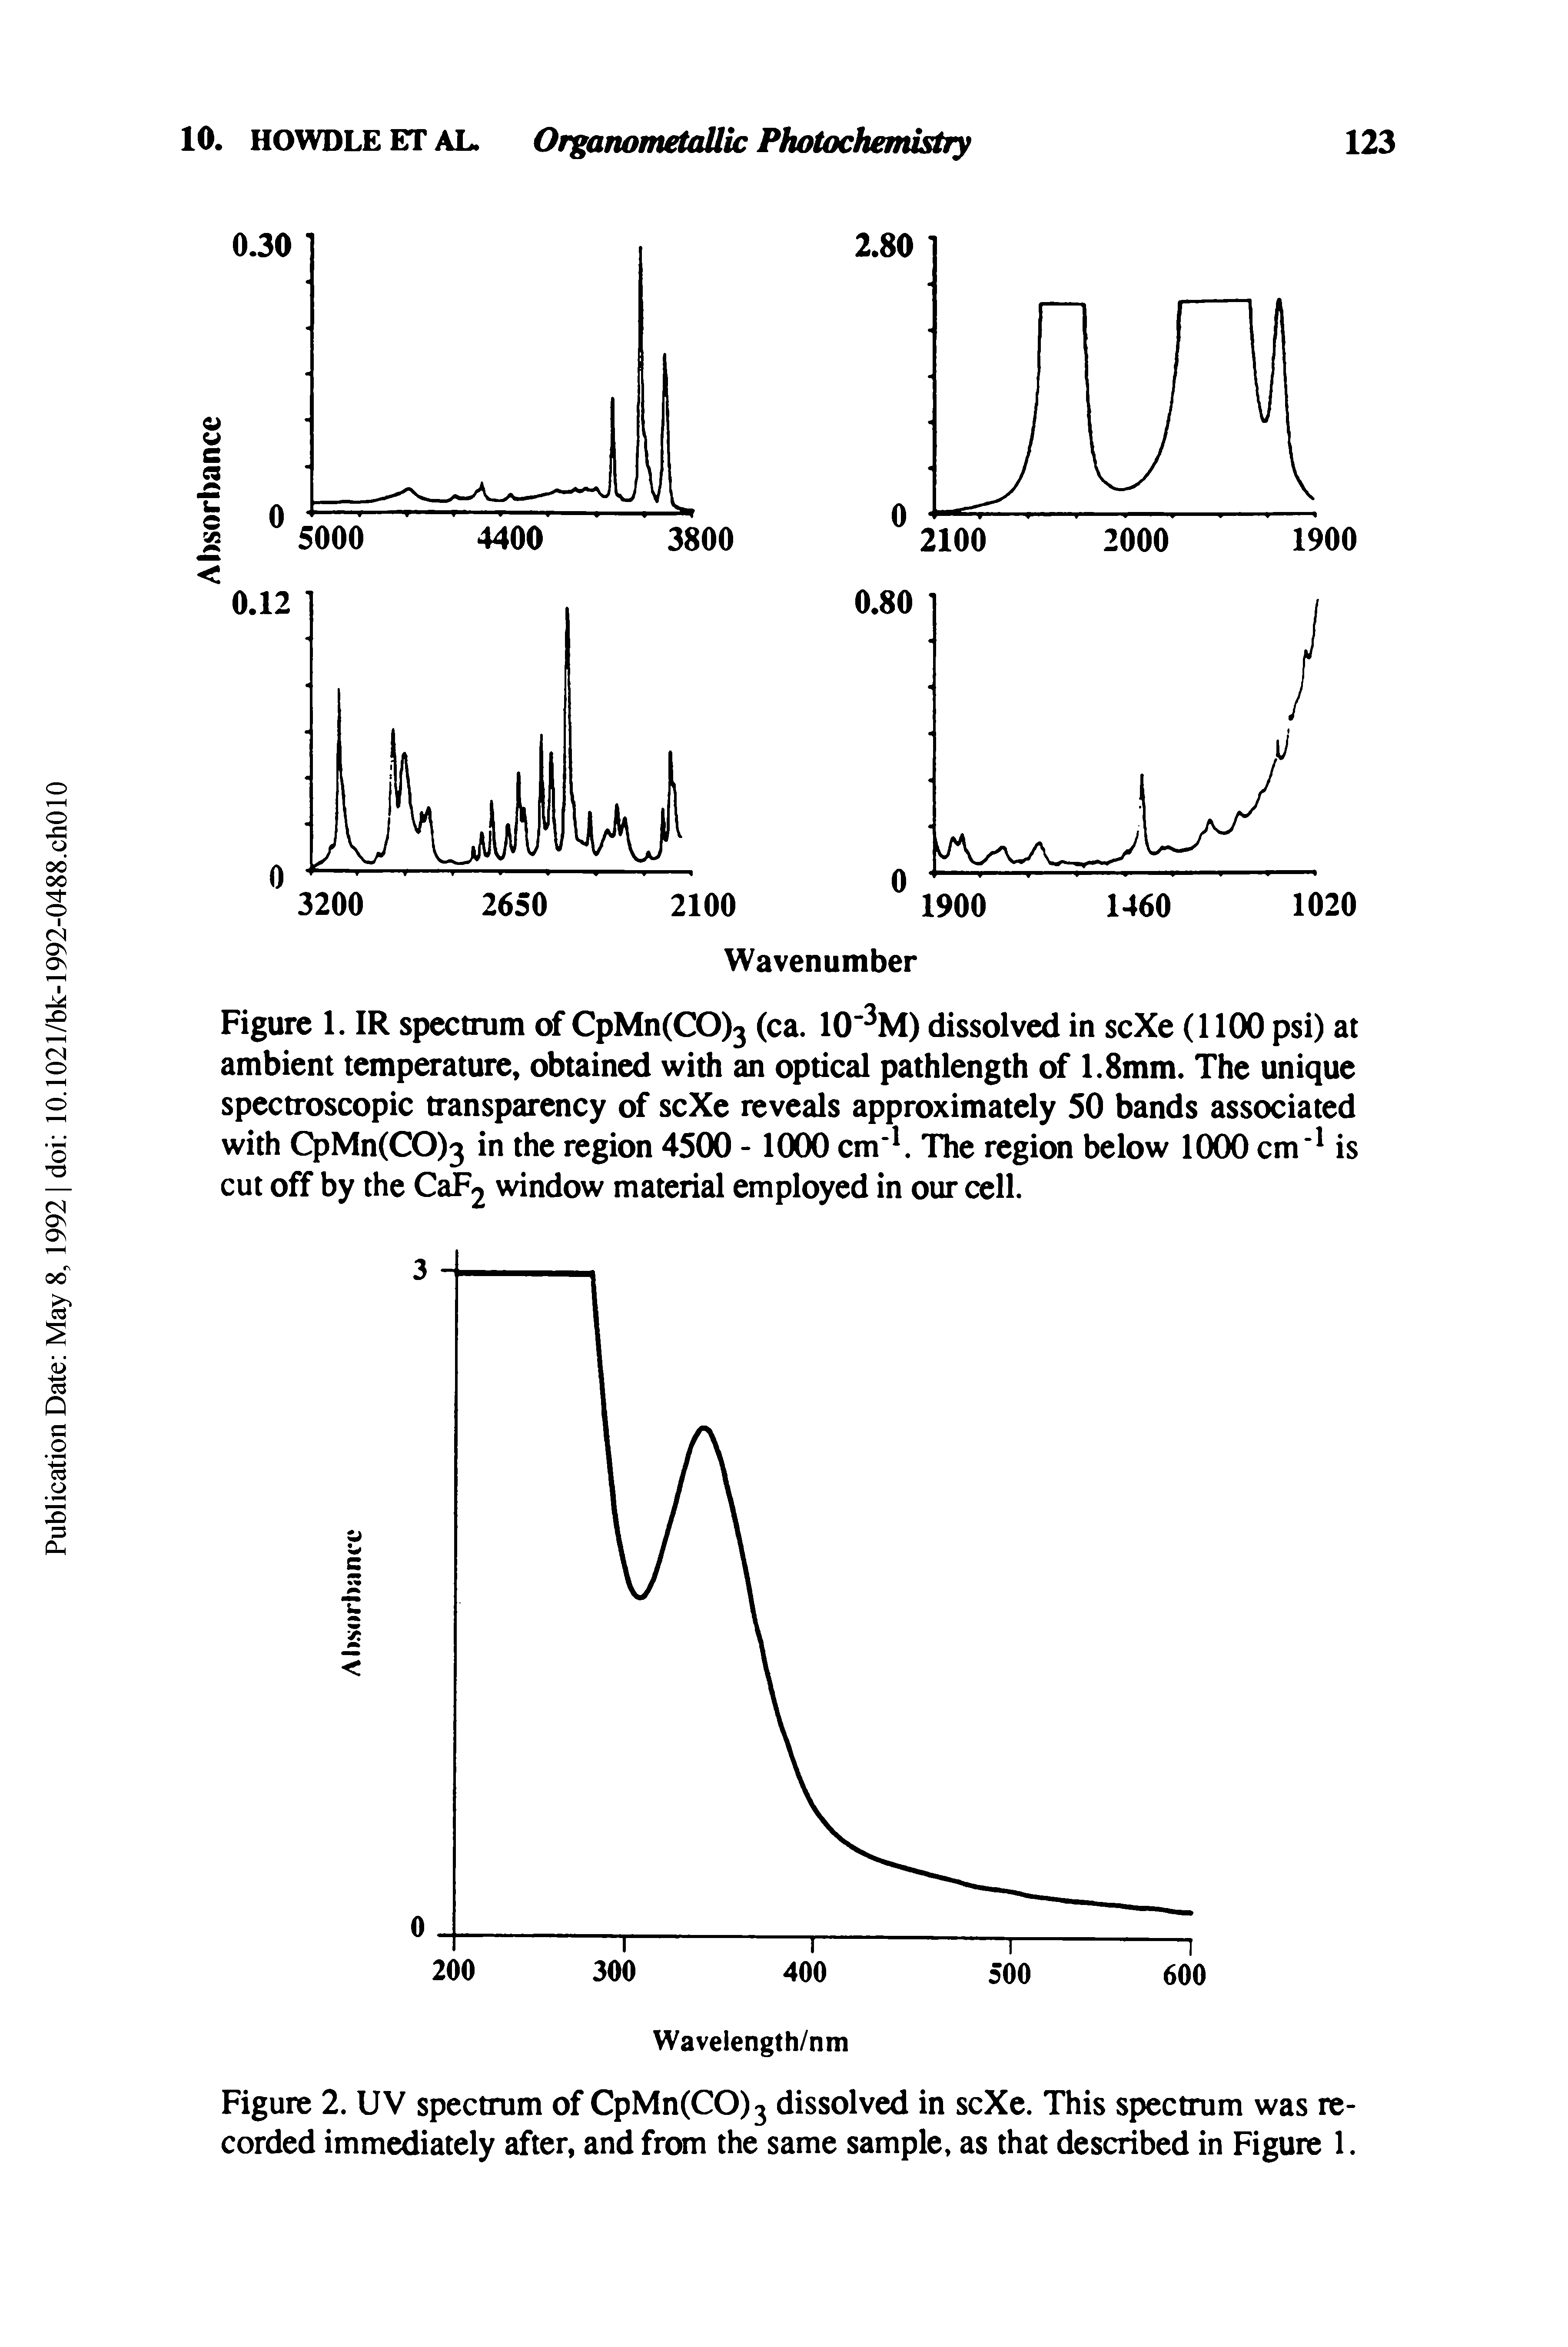 Figure 1. IR spectrum of CpMn(CO)3 (ca. 10 3M) dissolved in scXe (1100 psi) at ambient temperature, obtained with an optical pathlength of 1.8mm. The unique spectroscopic transparency of scXe reveals approximately 50 bands associated with CpMn(CO)3 in the region 4500 -1000 cm 1. The region below 1000 cm 1 is cut off by the CaF2 window material employed in our cell.